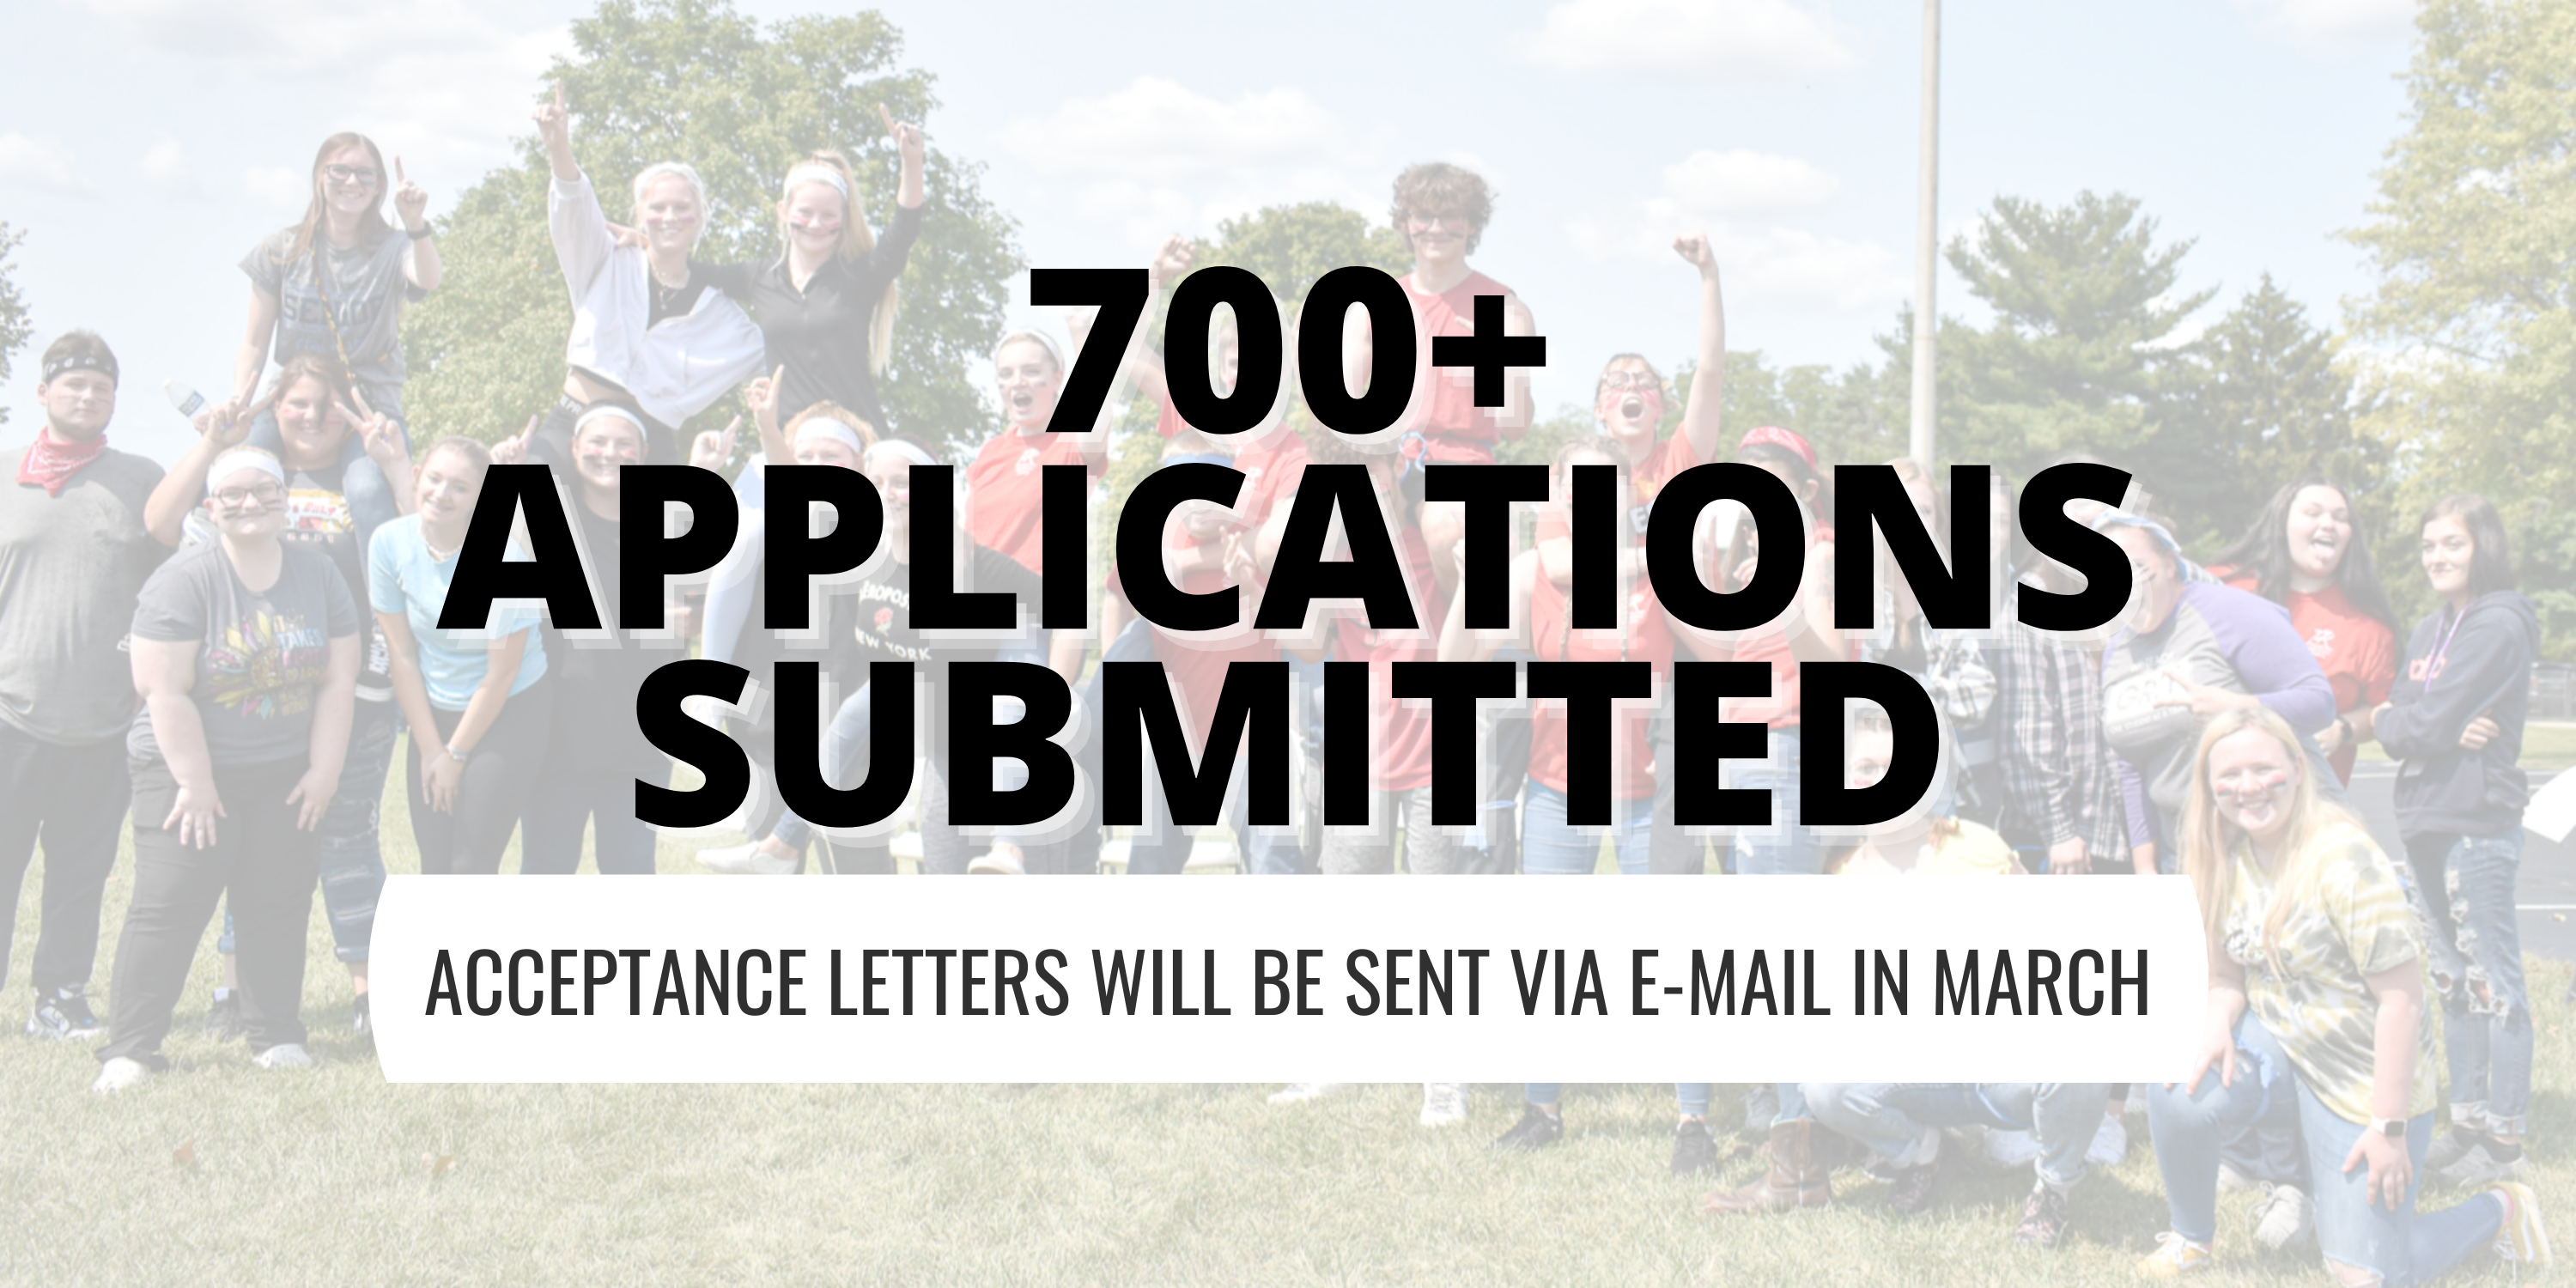 700+ Applications Submitted